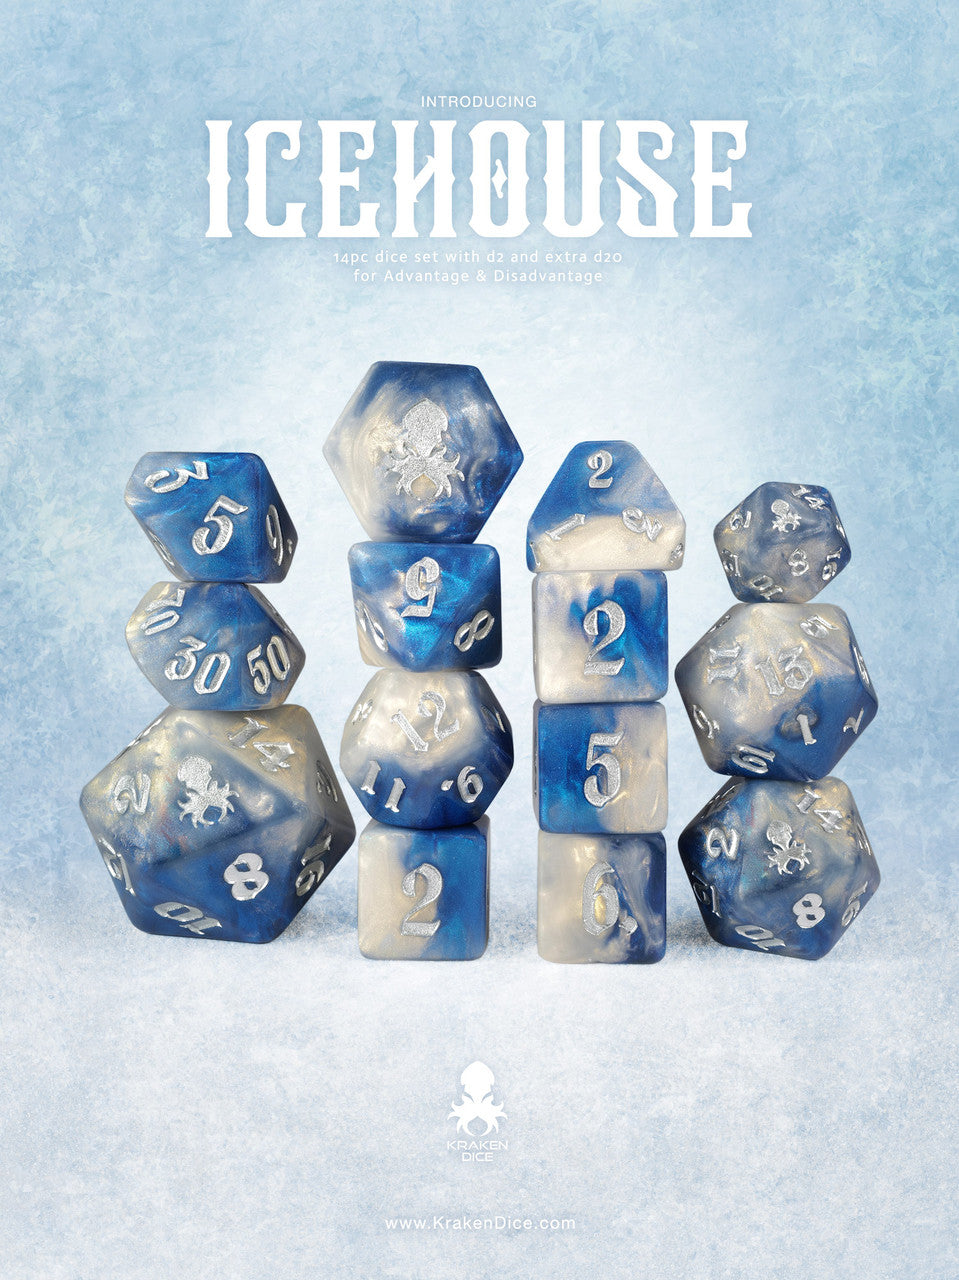 Icehouse 14pc Dice Set inked in Silver